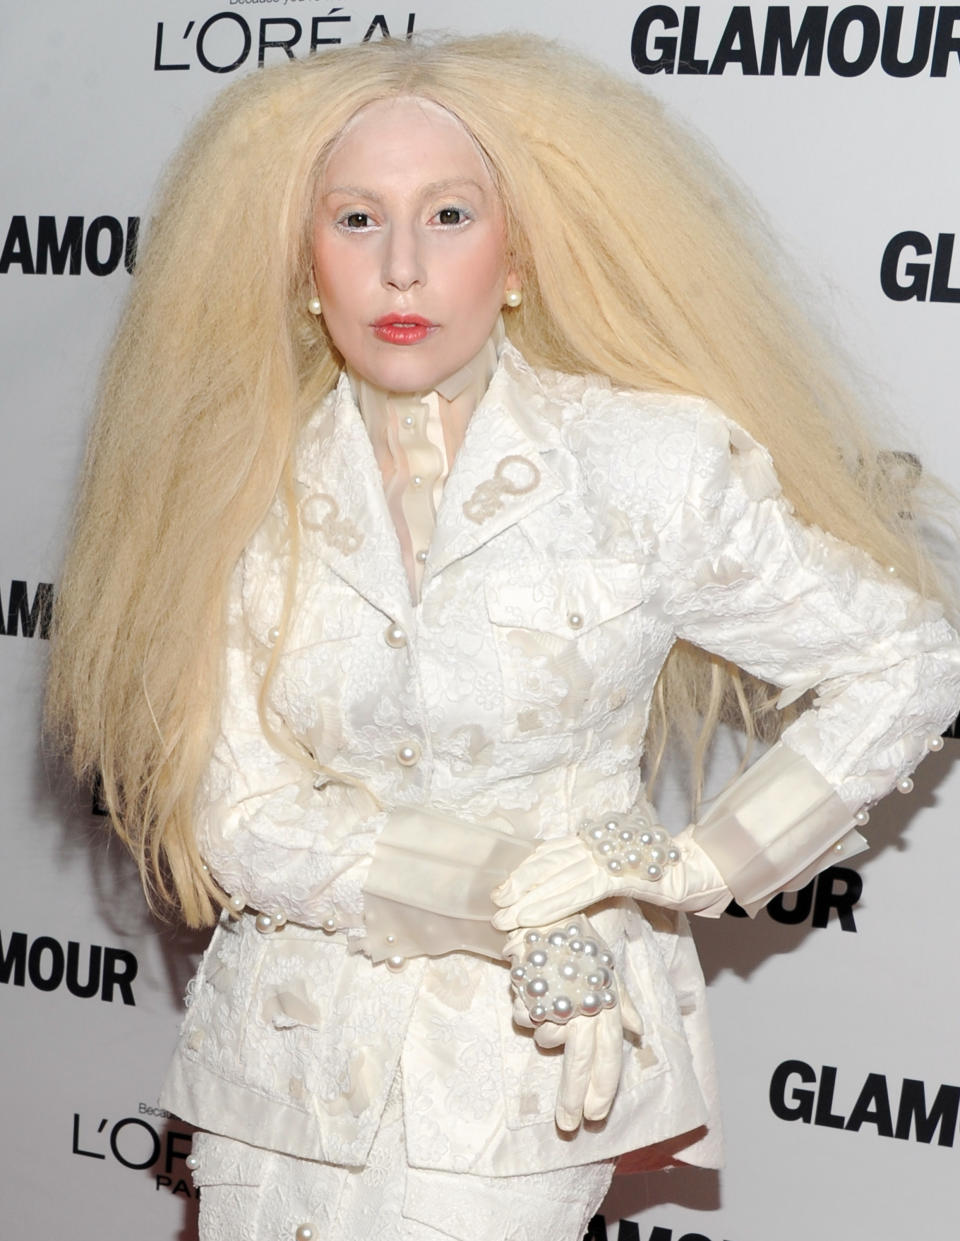 Honoree Lady Gaga attends the 23rd Annual Glamour Women of the Year Awards hosted by Glamour Magazine at Carnegie Hall on Monday, Nov. 11, 2013 in New York. (Photo by Evan Agostini/Invision/AP)